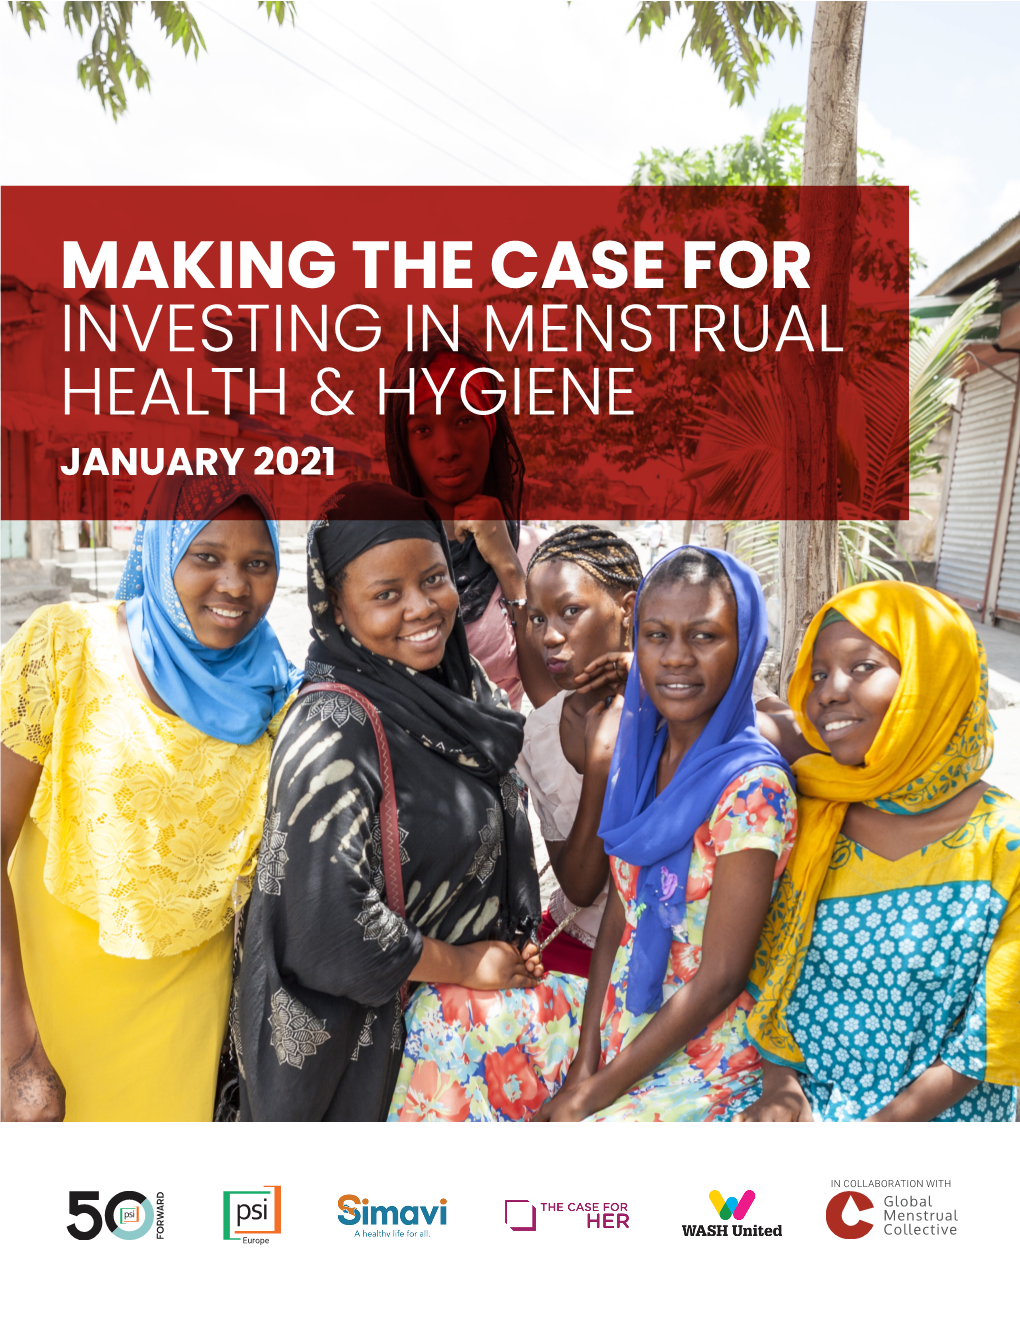 Making the Case for Investing in Menstrual Health & Hygiene January 2021